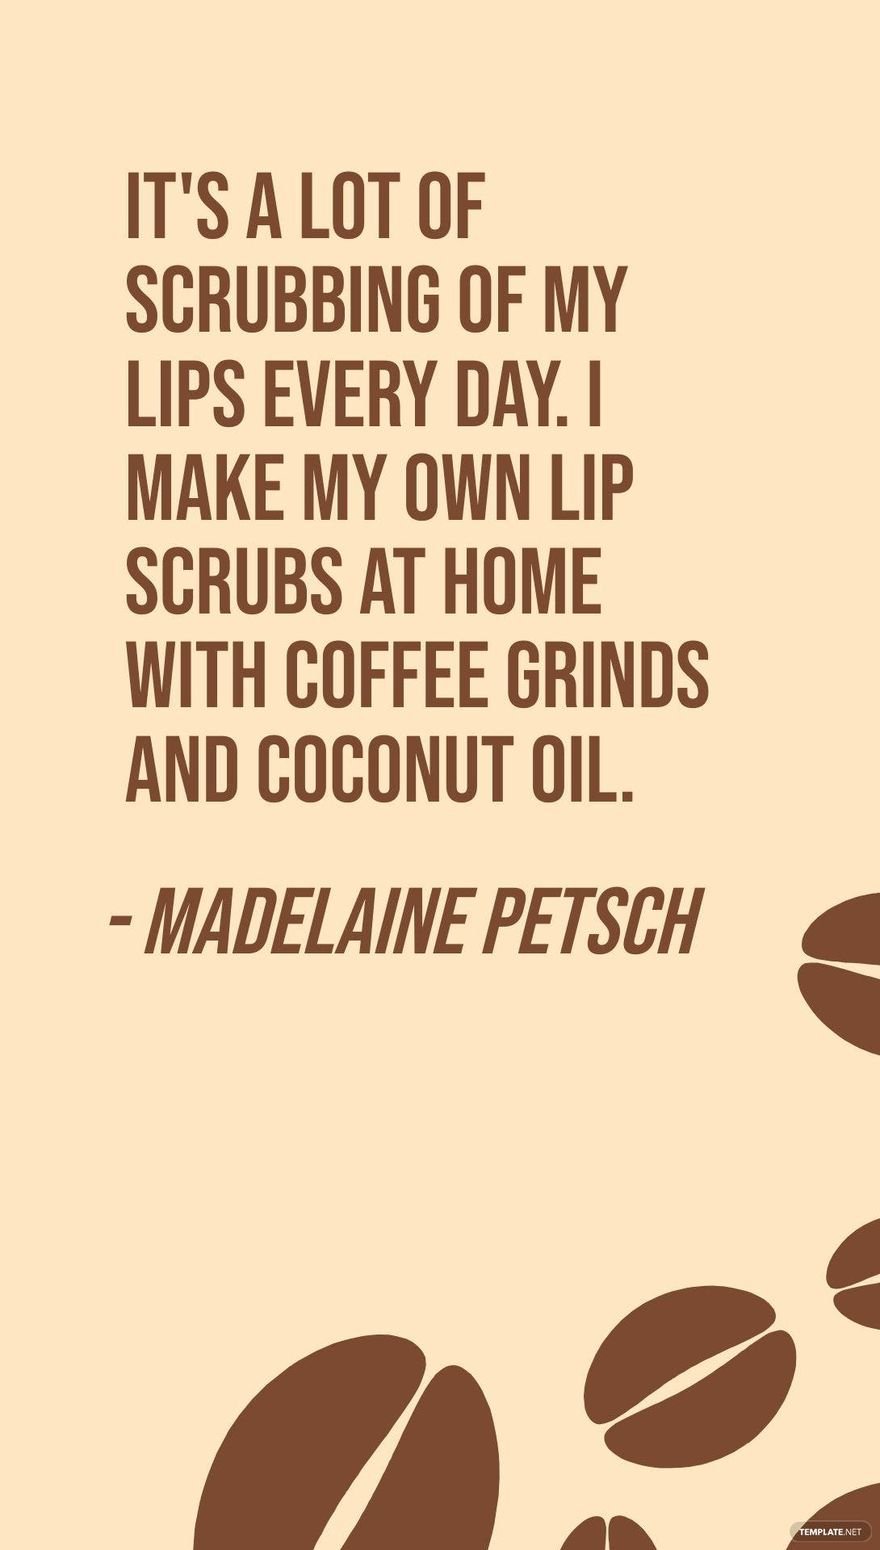 Free Madelaine Petsch - It's a lot of scrubbing of my lips every day. I make my own lip scrubs at home with coffee grinds and coconut oil. in JPG